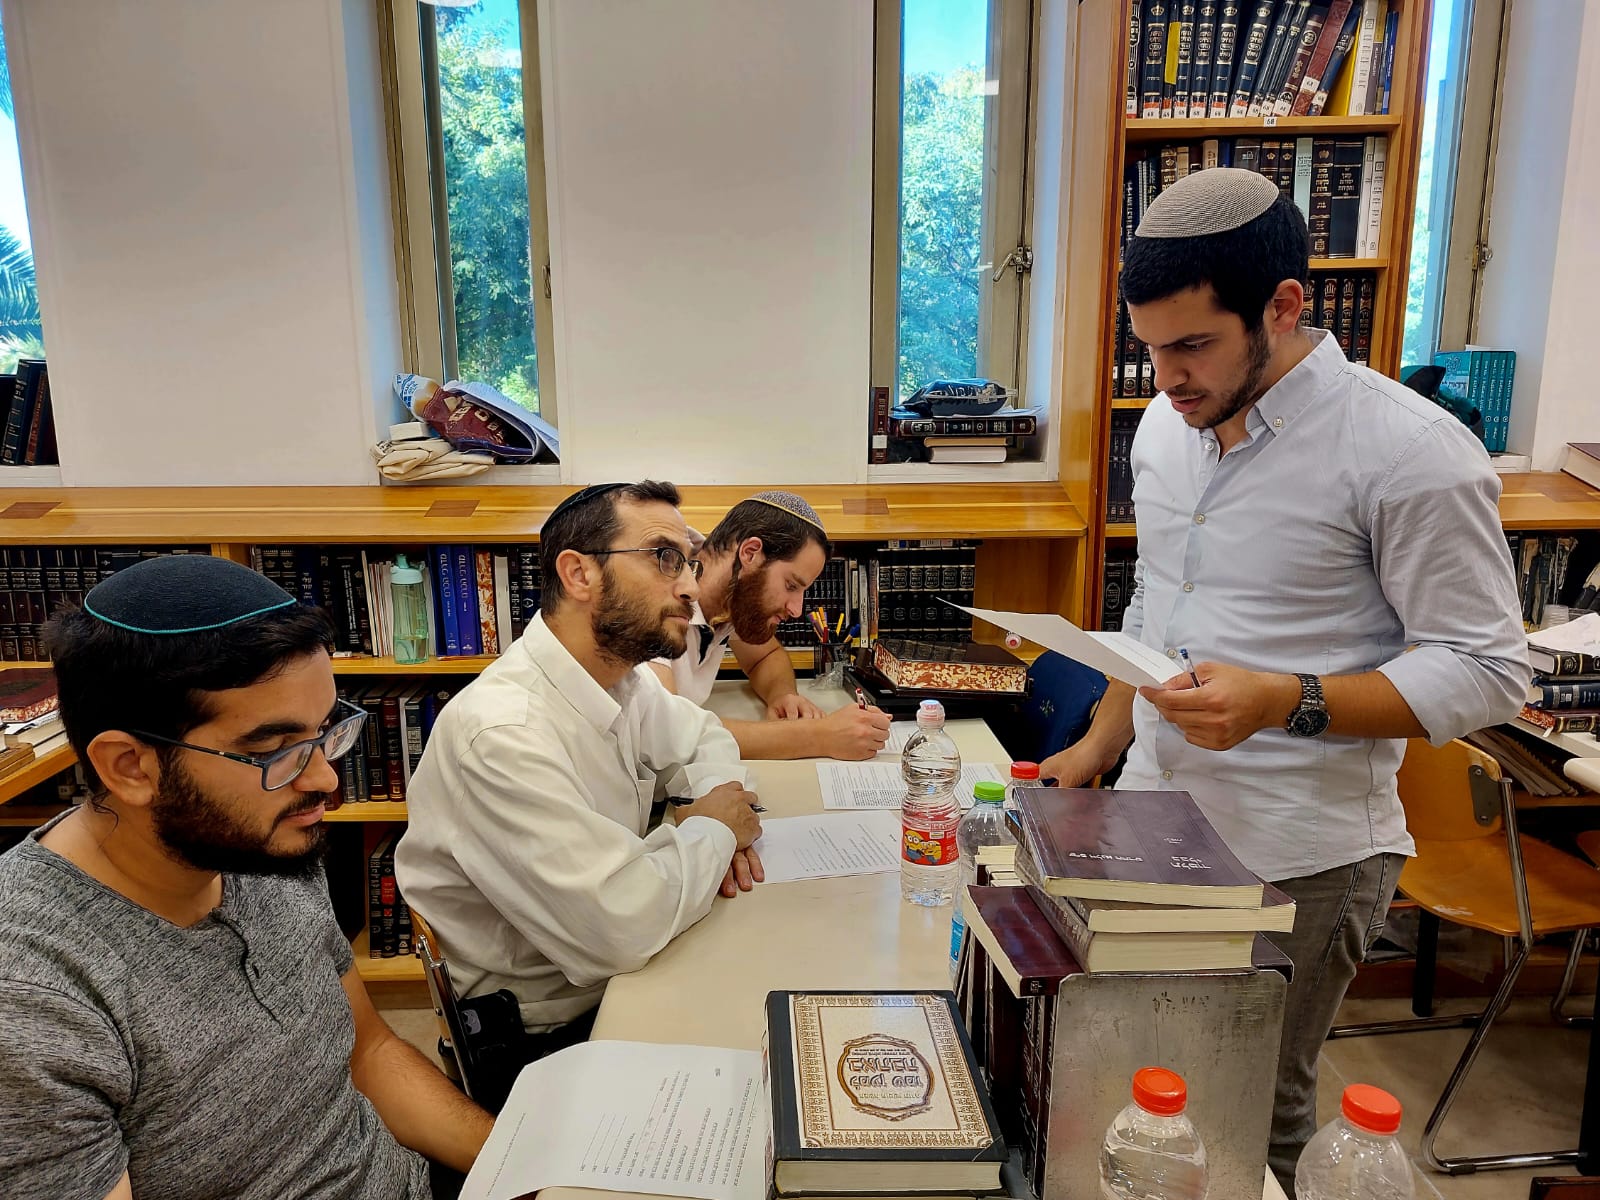 As Rosh Hashana approaches, the entire yeshiva gathered for Pruzbul writing in the Beit Midrash!